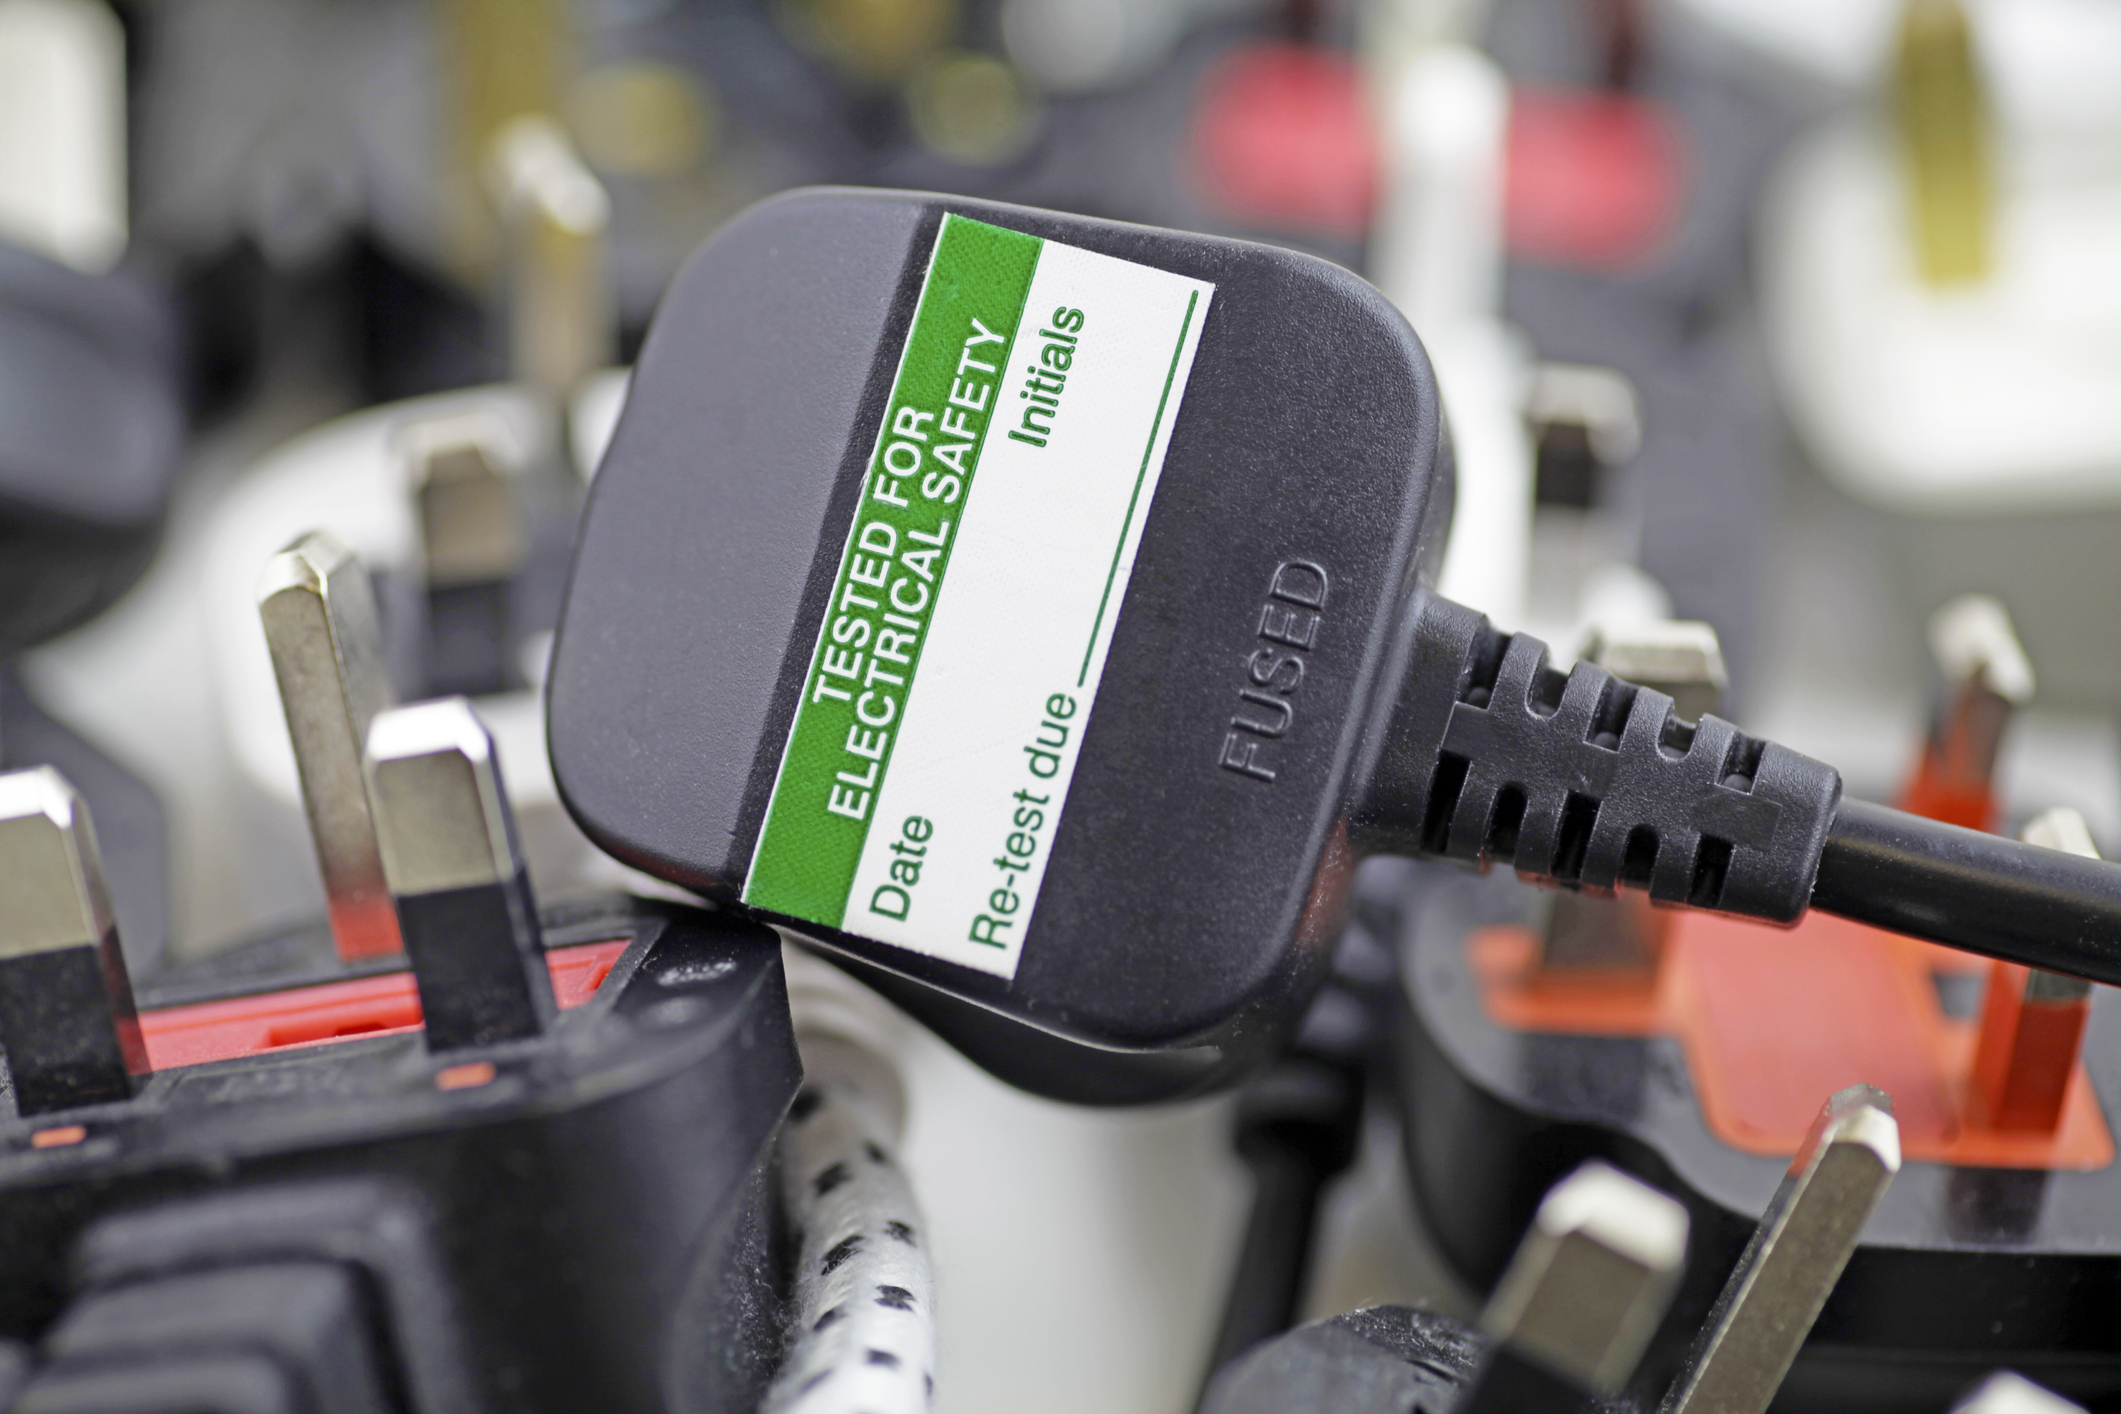 PAT Testing: What You Need to Know